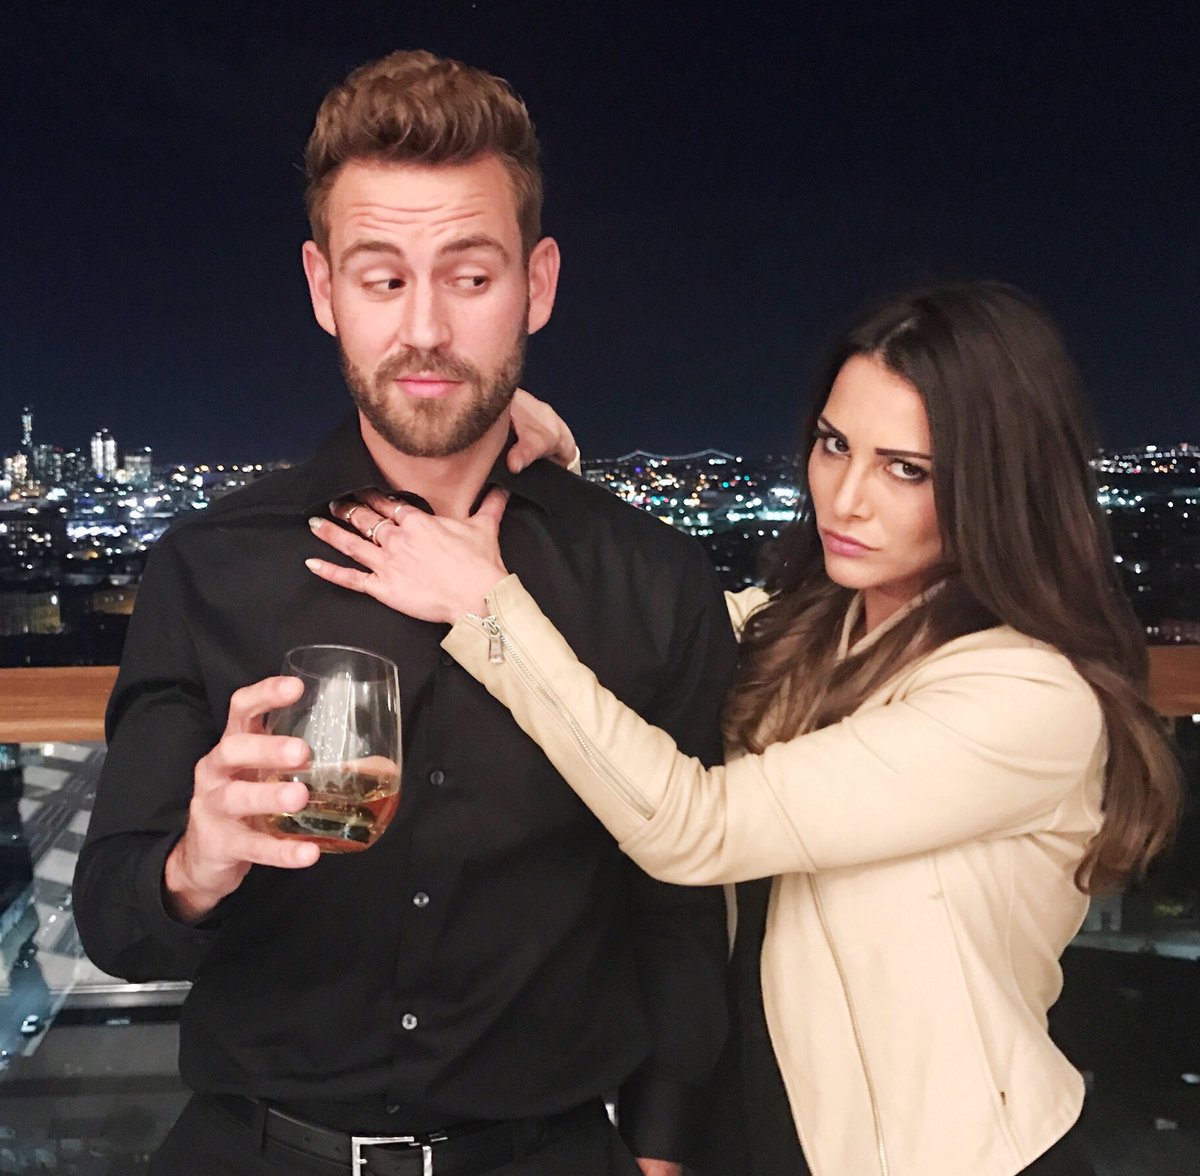 goals -  Nick Viall - Bachelor 21 - Episode 9 Feb 27 - *Sleuthing Spoilers* - Page 2 C5MkfomWcAA6Nrk